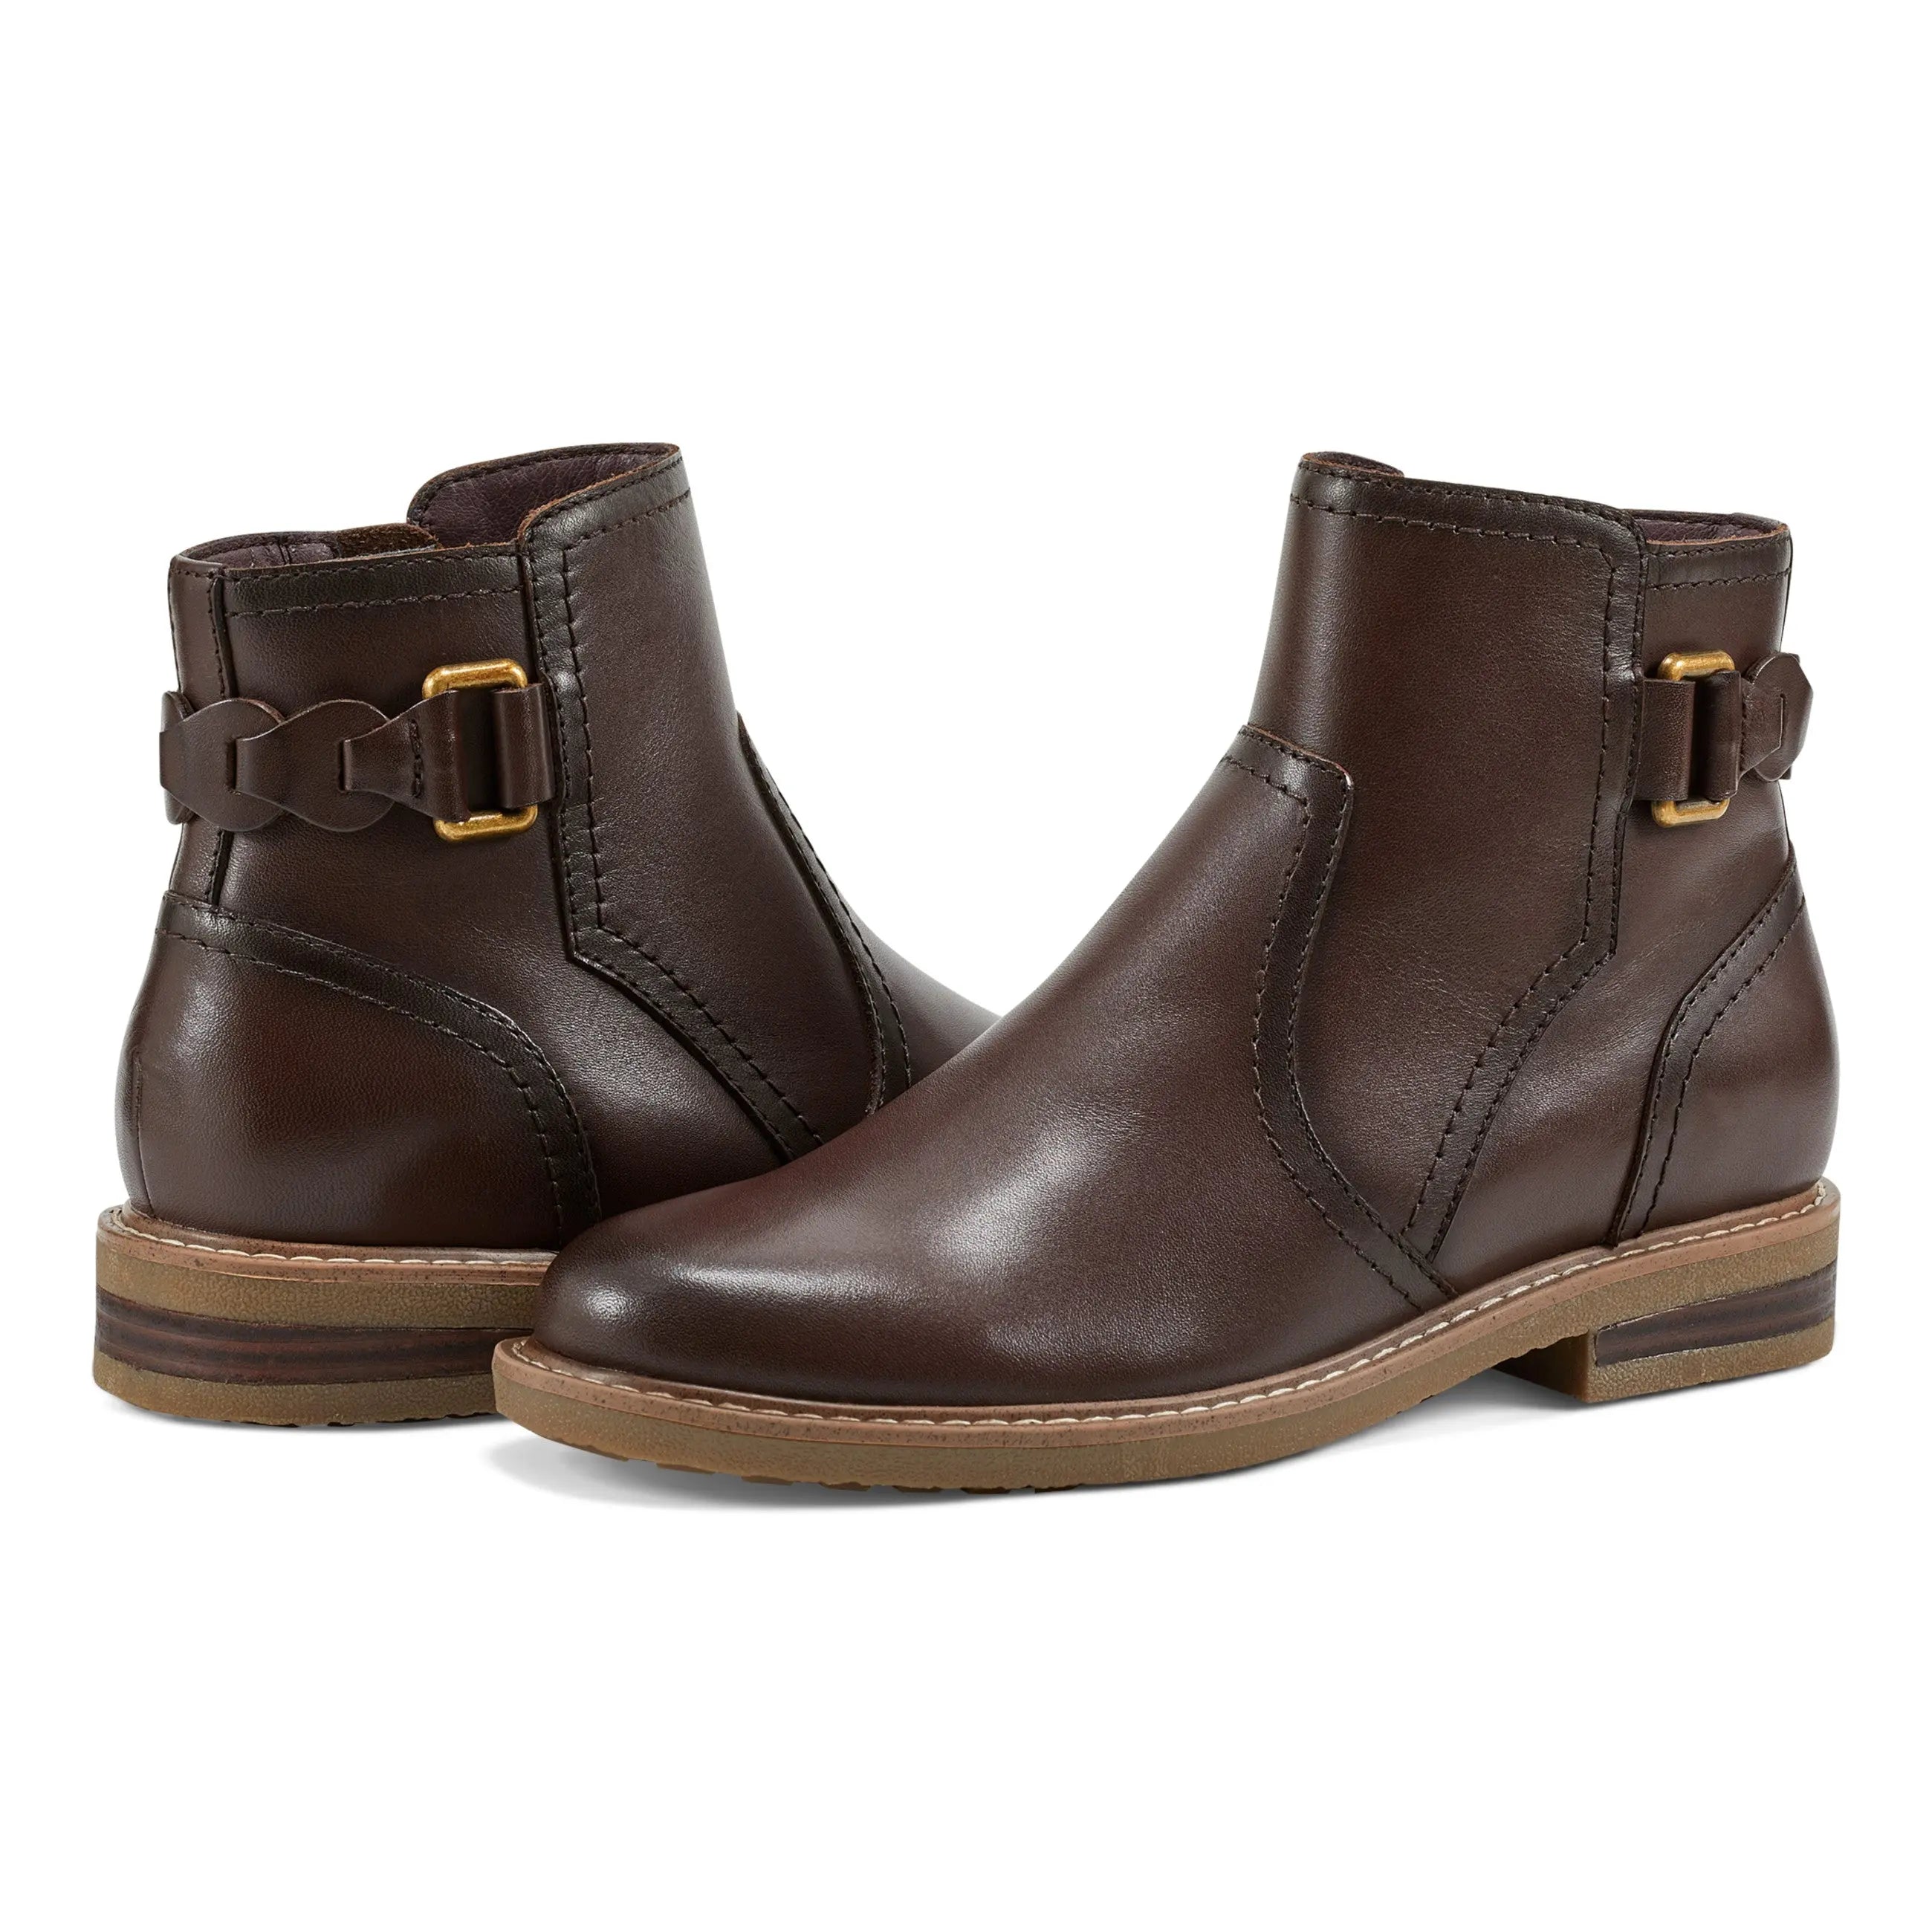 Jenna Cold Weather Round Toe Casual Booties